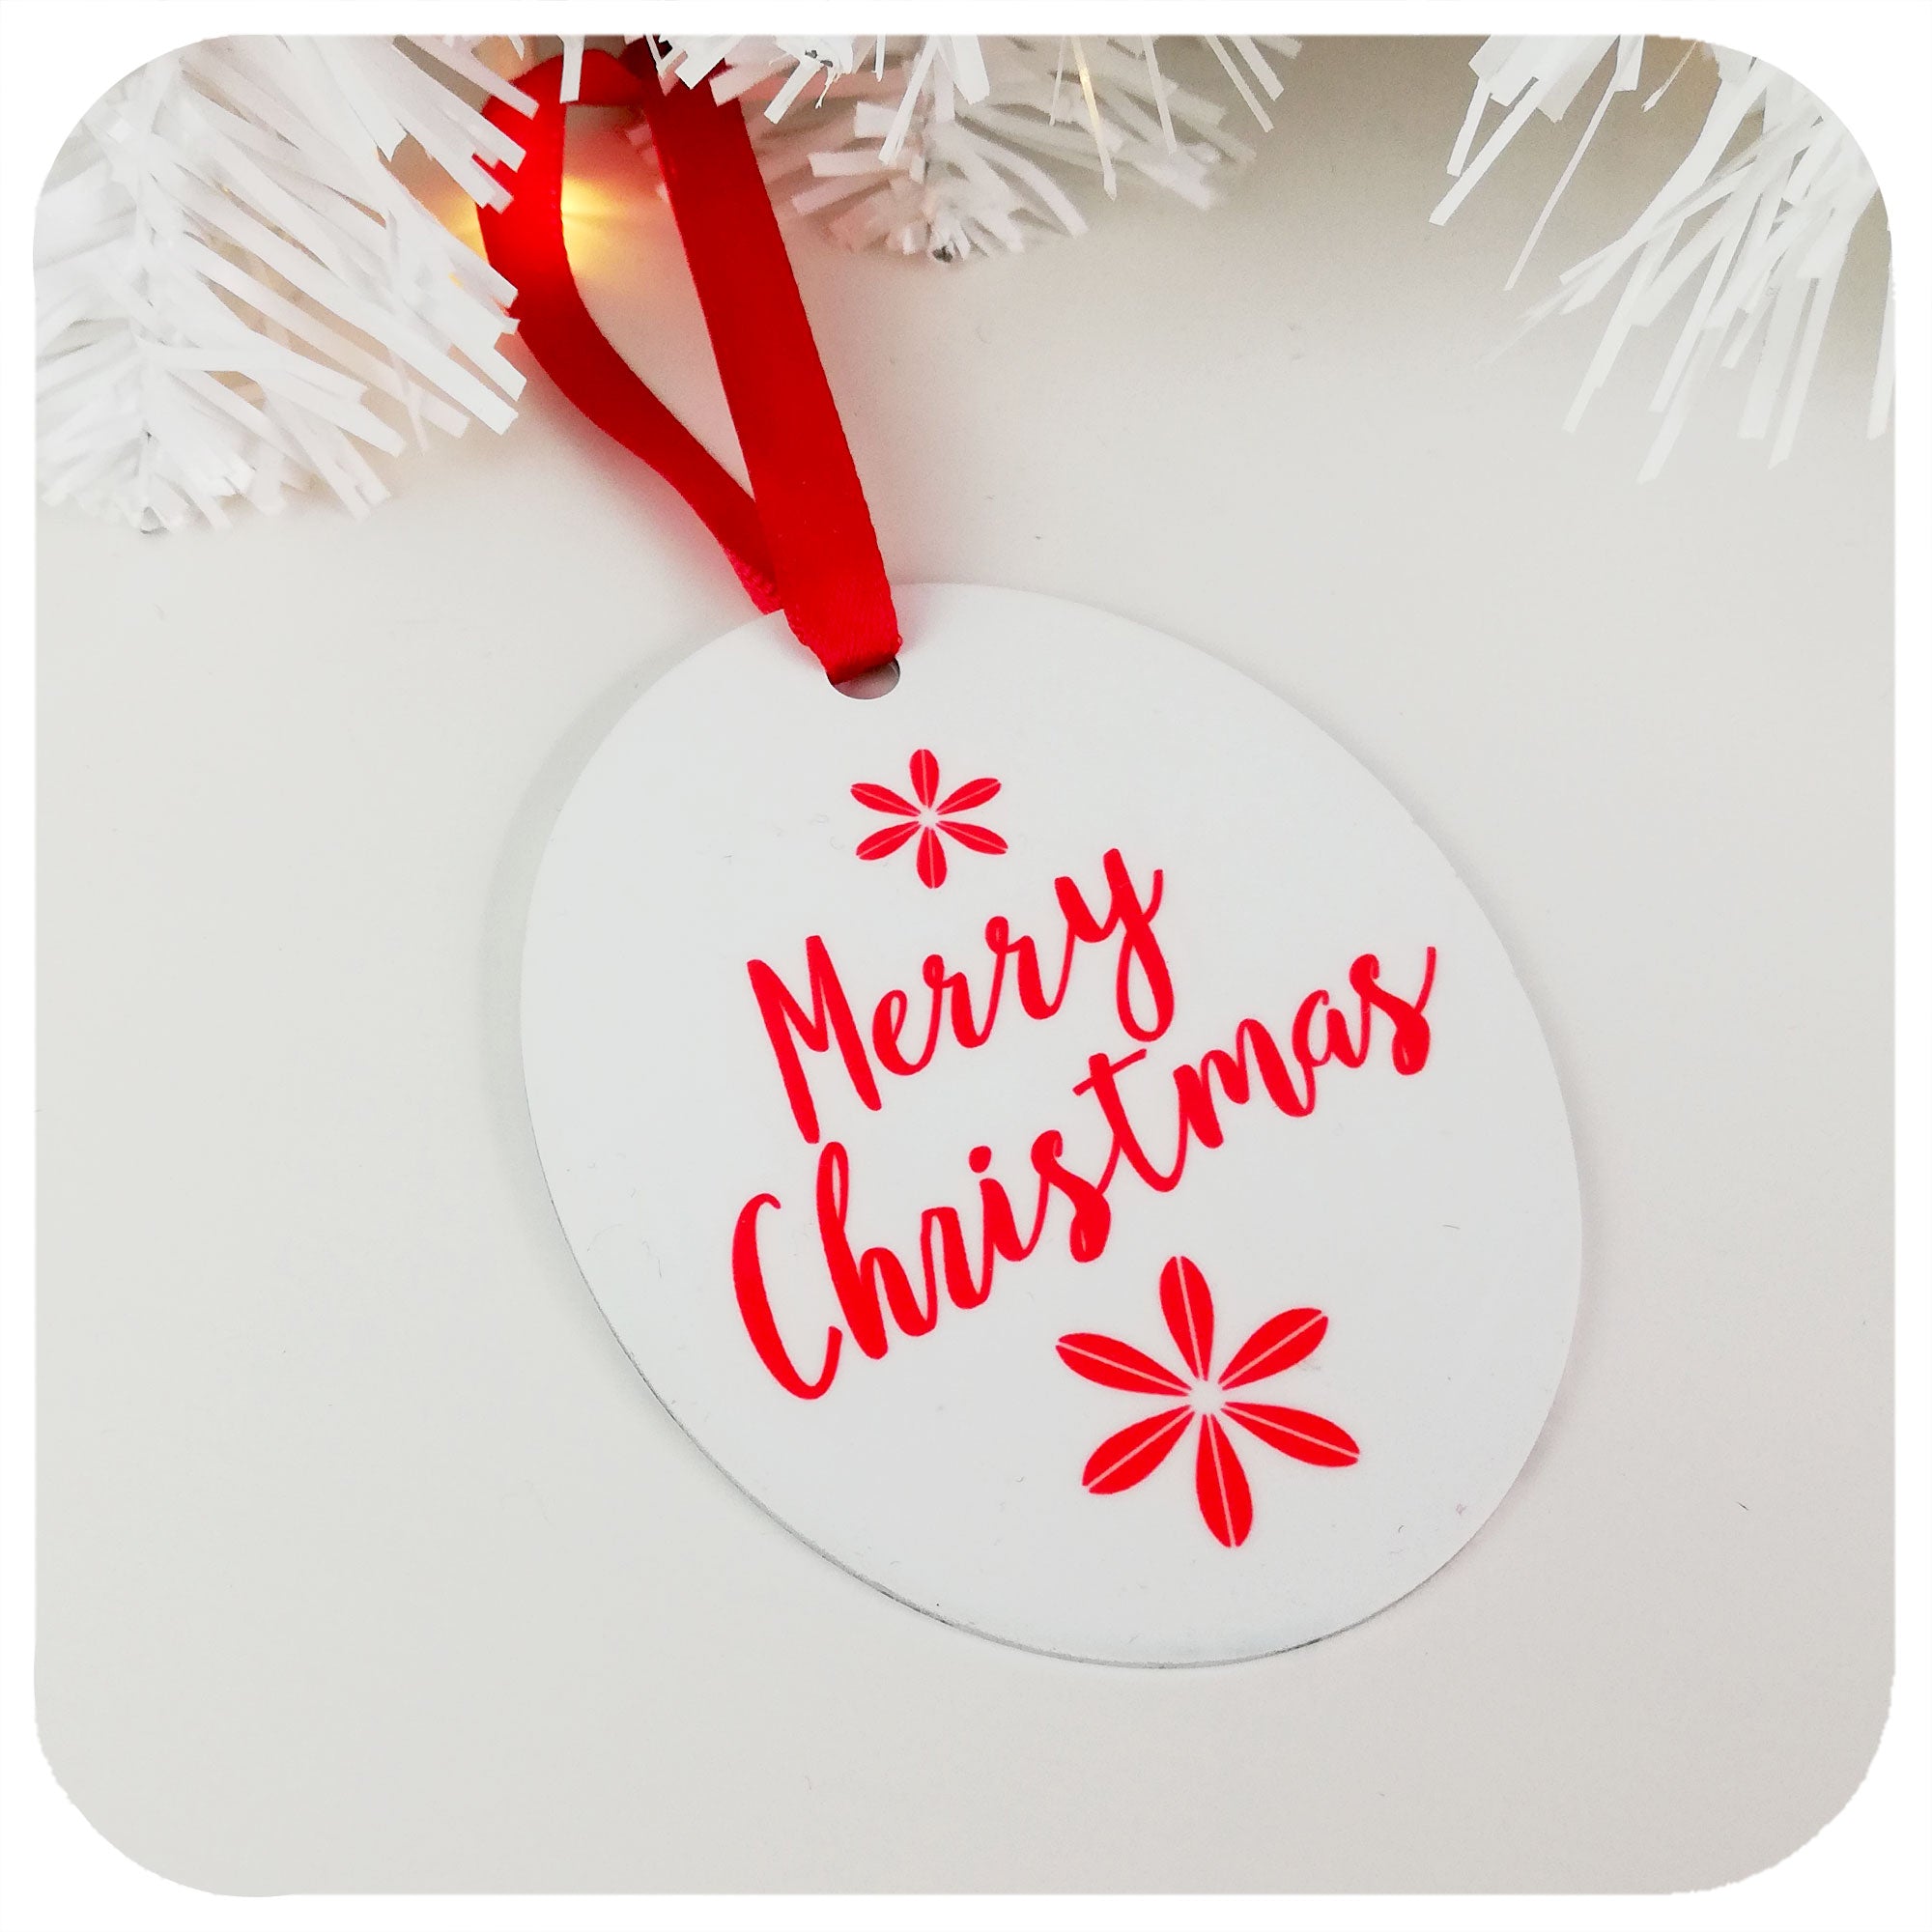 Christmas Tree Decoration saying 'Merry Christmas' in red & white, hanging by red ribbon on a white table | The Inkabilly Emporium